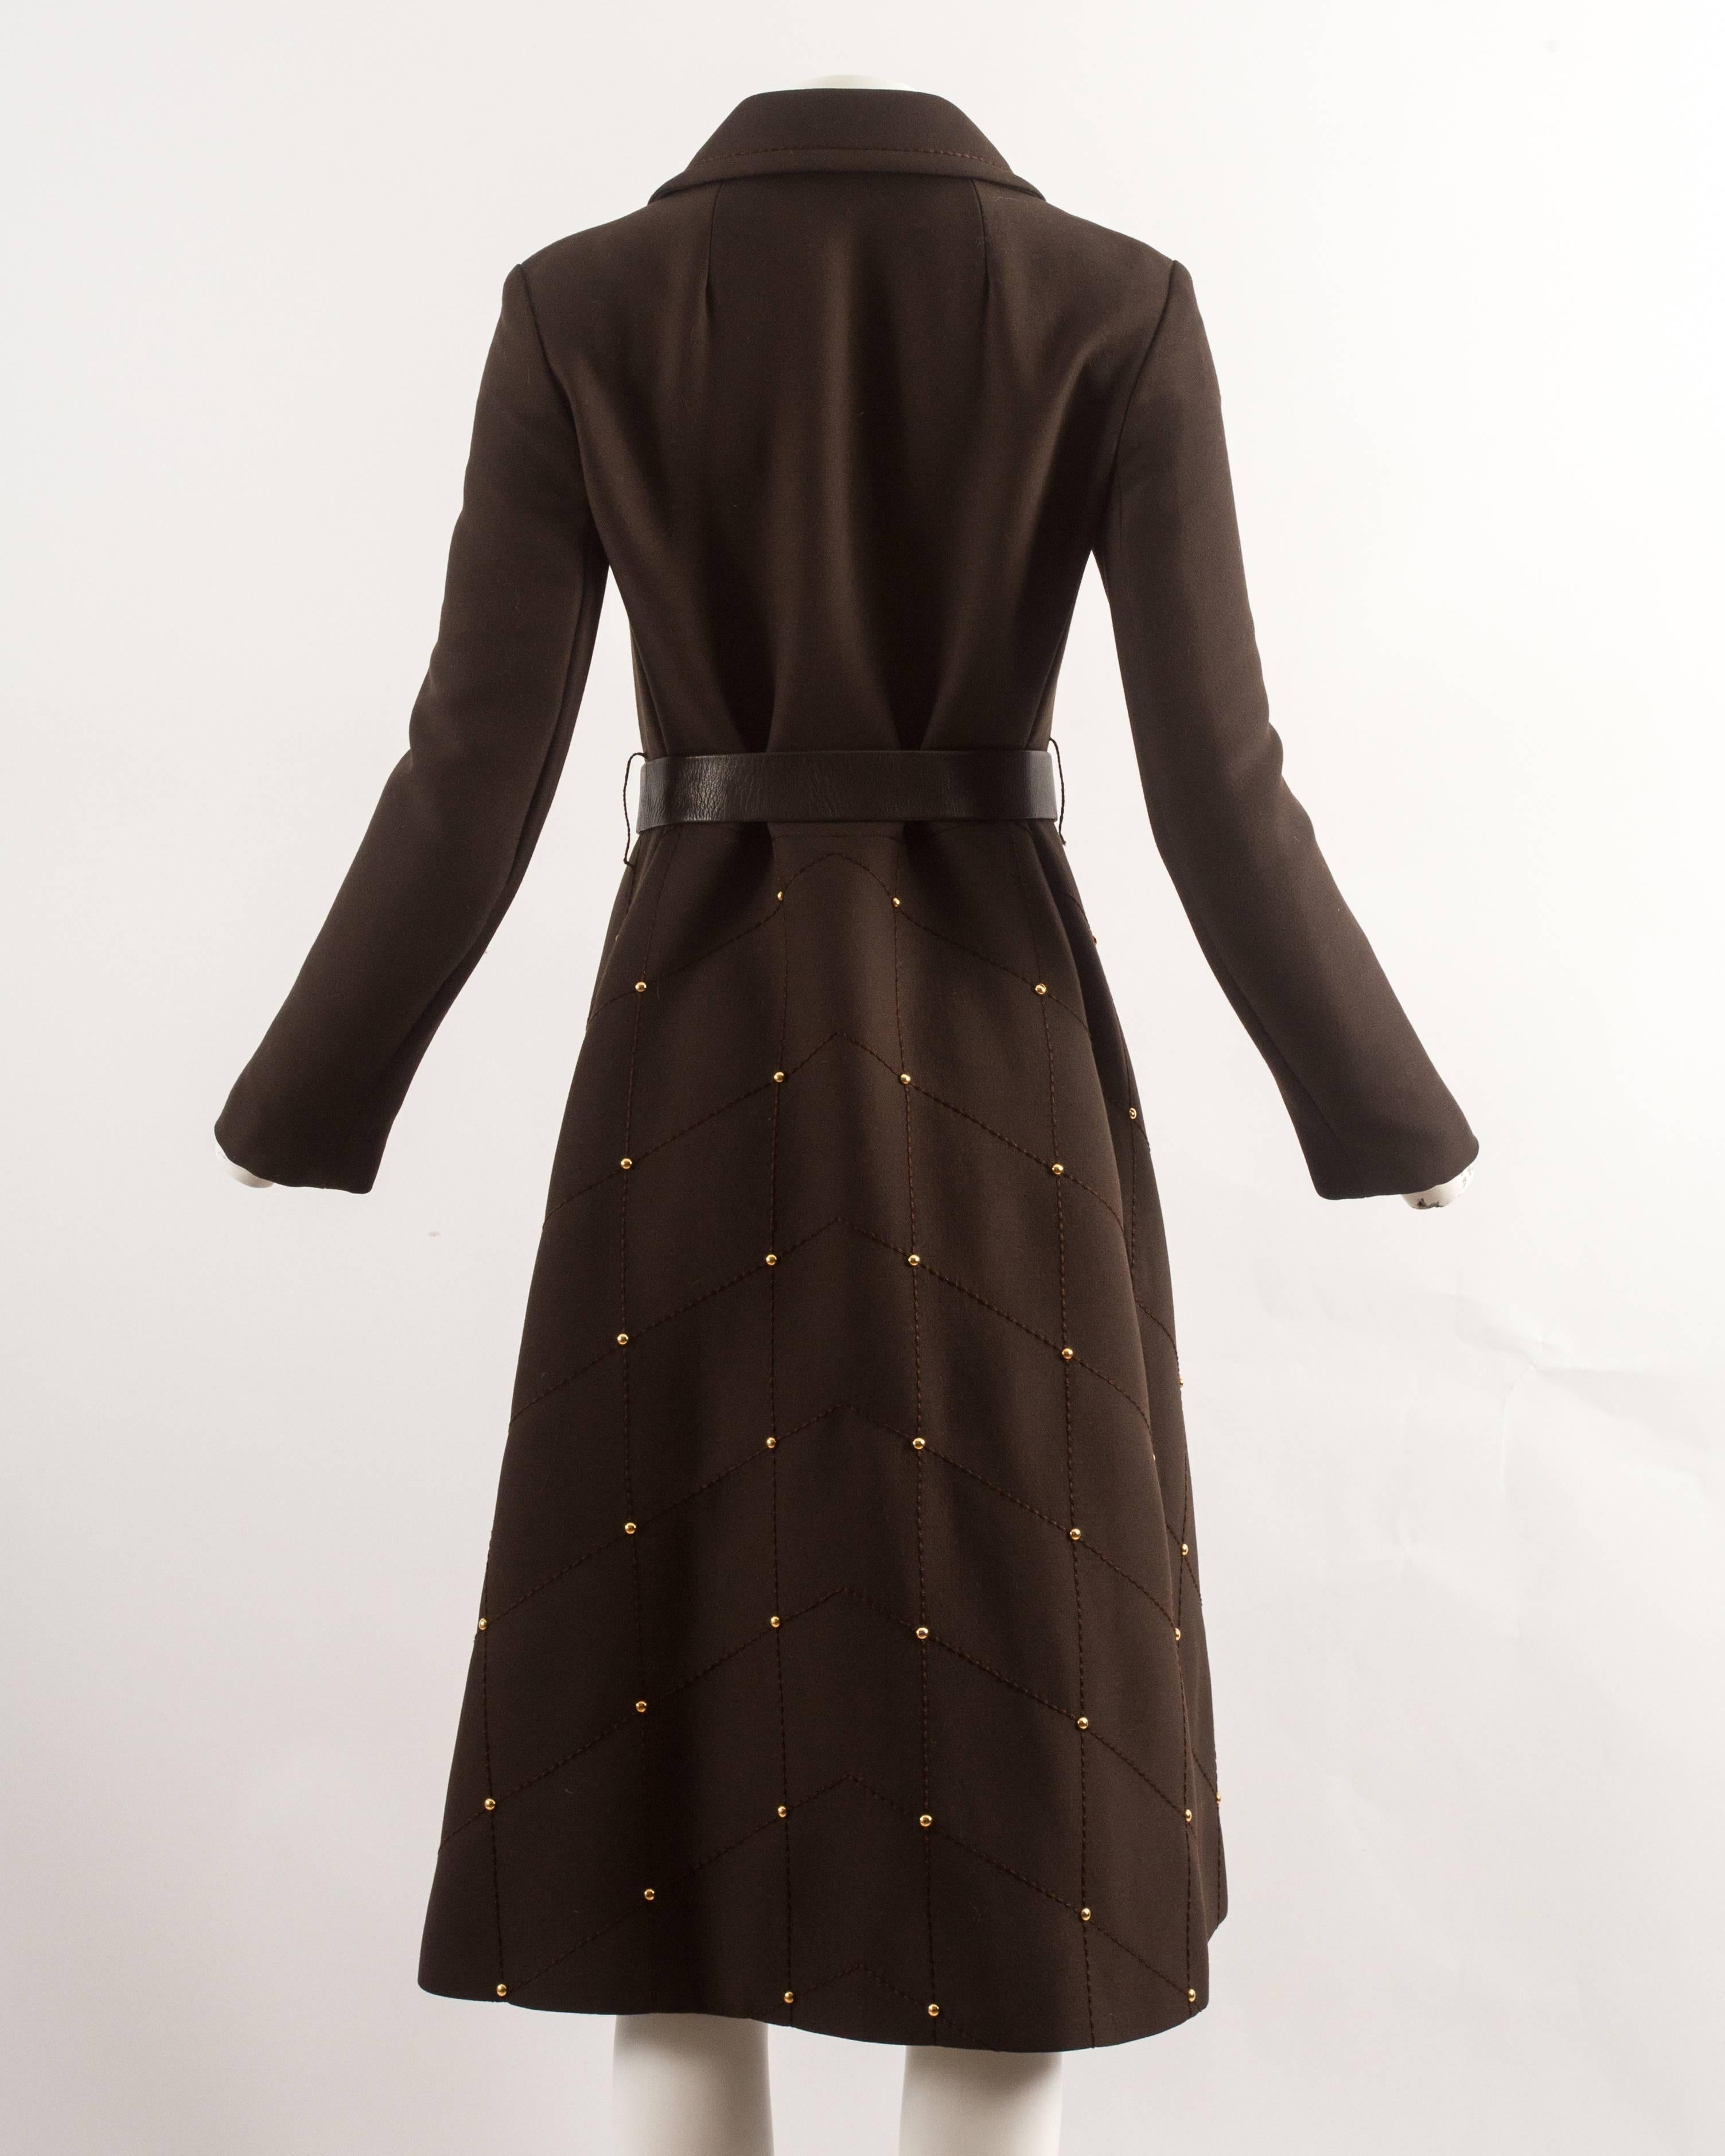 1960s brown wool coat with gold studs and belt In Excellent Condition For Sale In London, GB